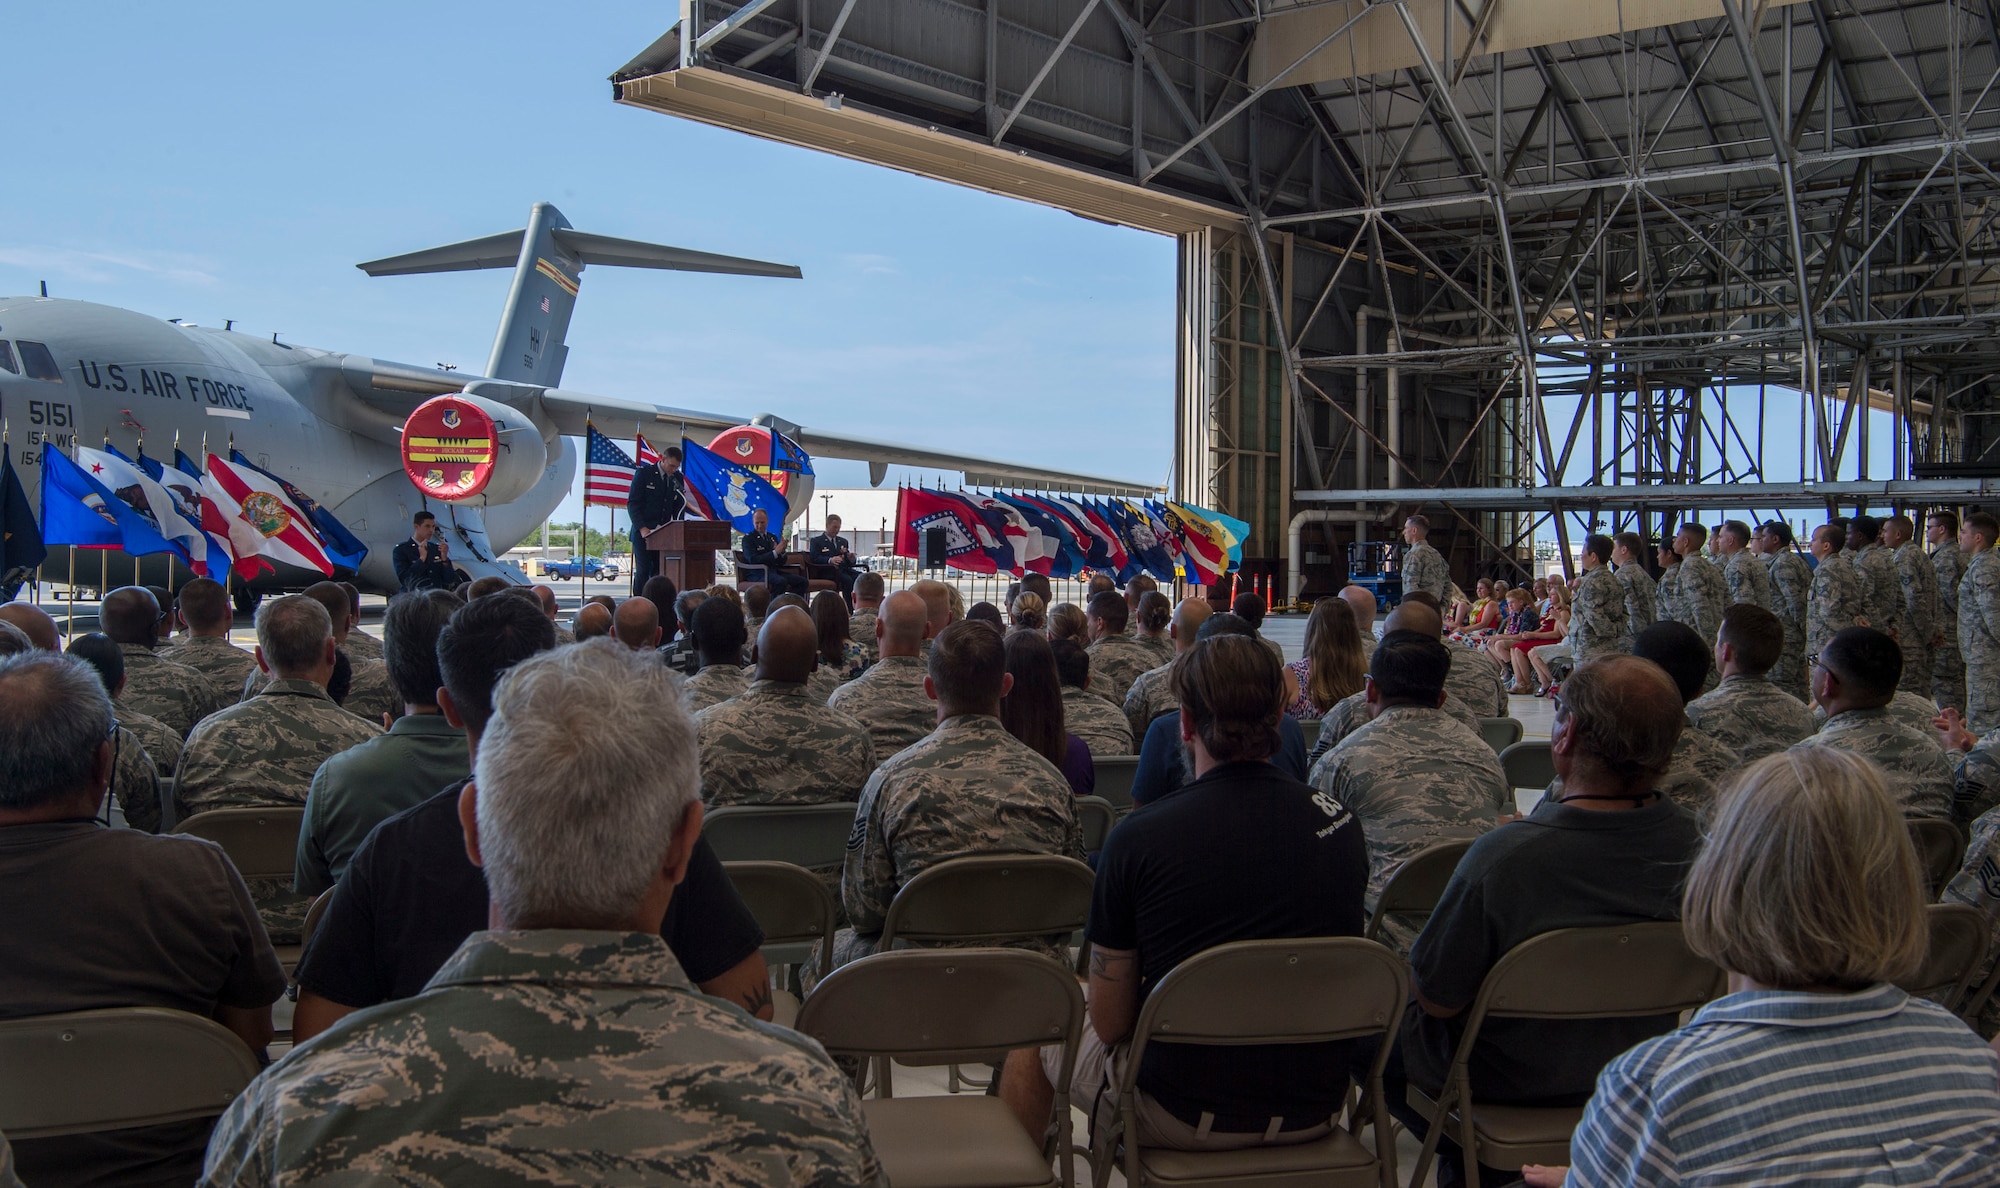 Airmen from around the 15th Wing, attend the 15th Maintenance Group change of command ceremony, Joint Base Pearl Harbor-Hickam, Hawaii, July 16, 2018. The MXG supports 31 home station aircraft to meet global airlift, global strike and theater security mission requirements and provides support to over 7,200 joint and allied aircraft transiting through Hickam Field each year. (U.S. Air Force photo by Tech. Sgt. Heather Redman)